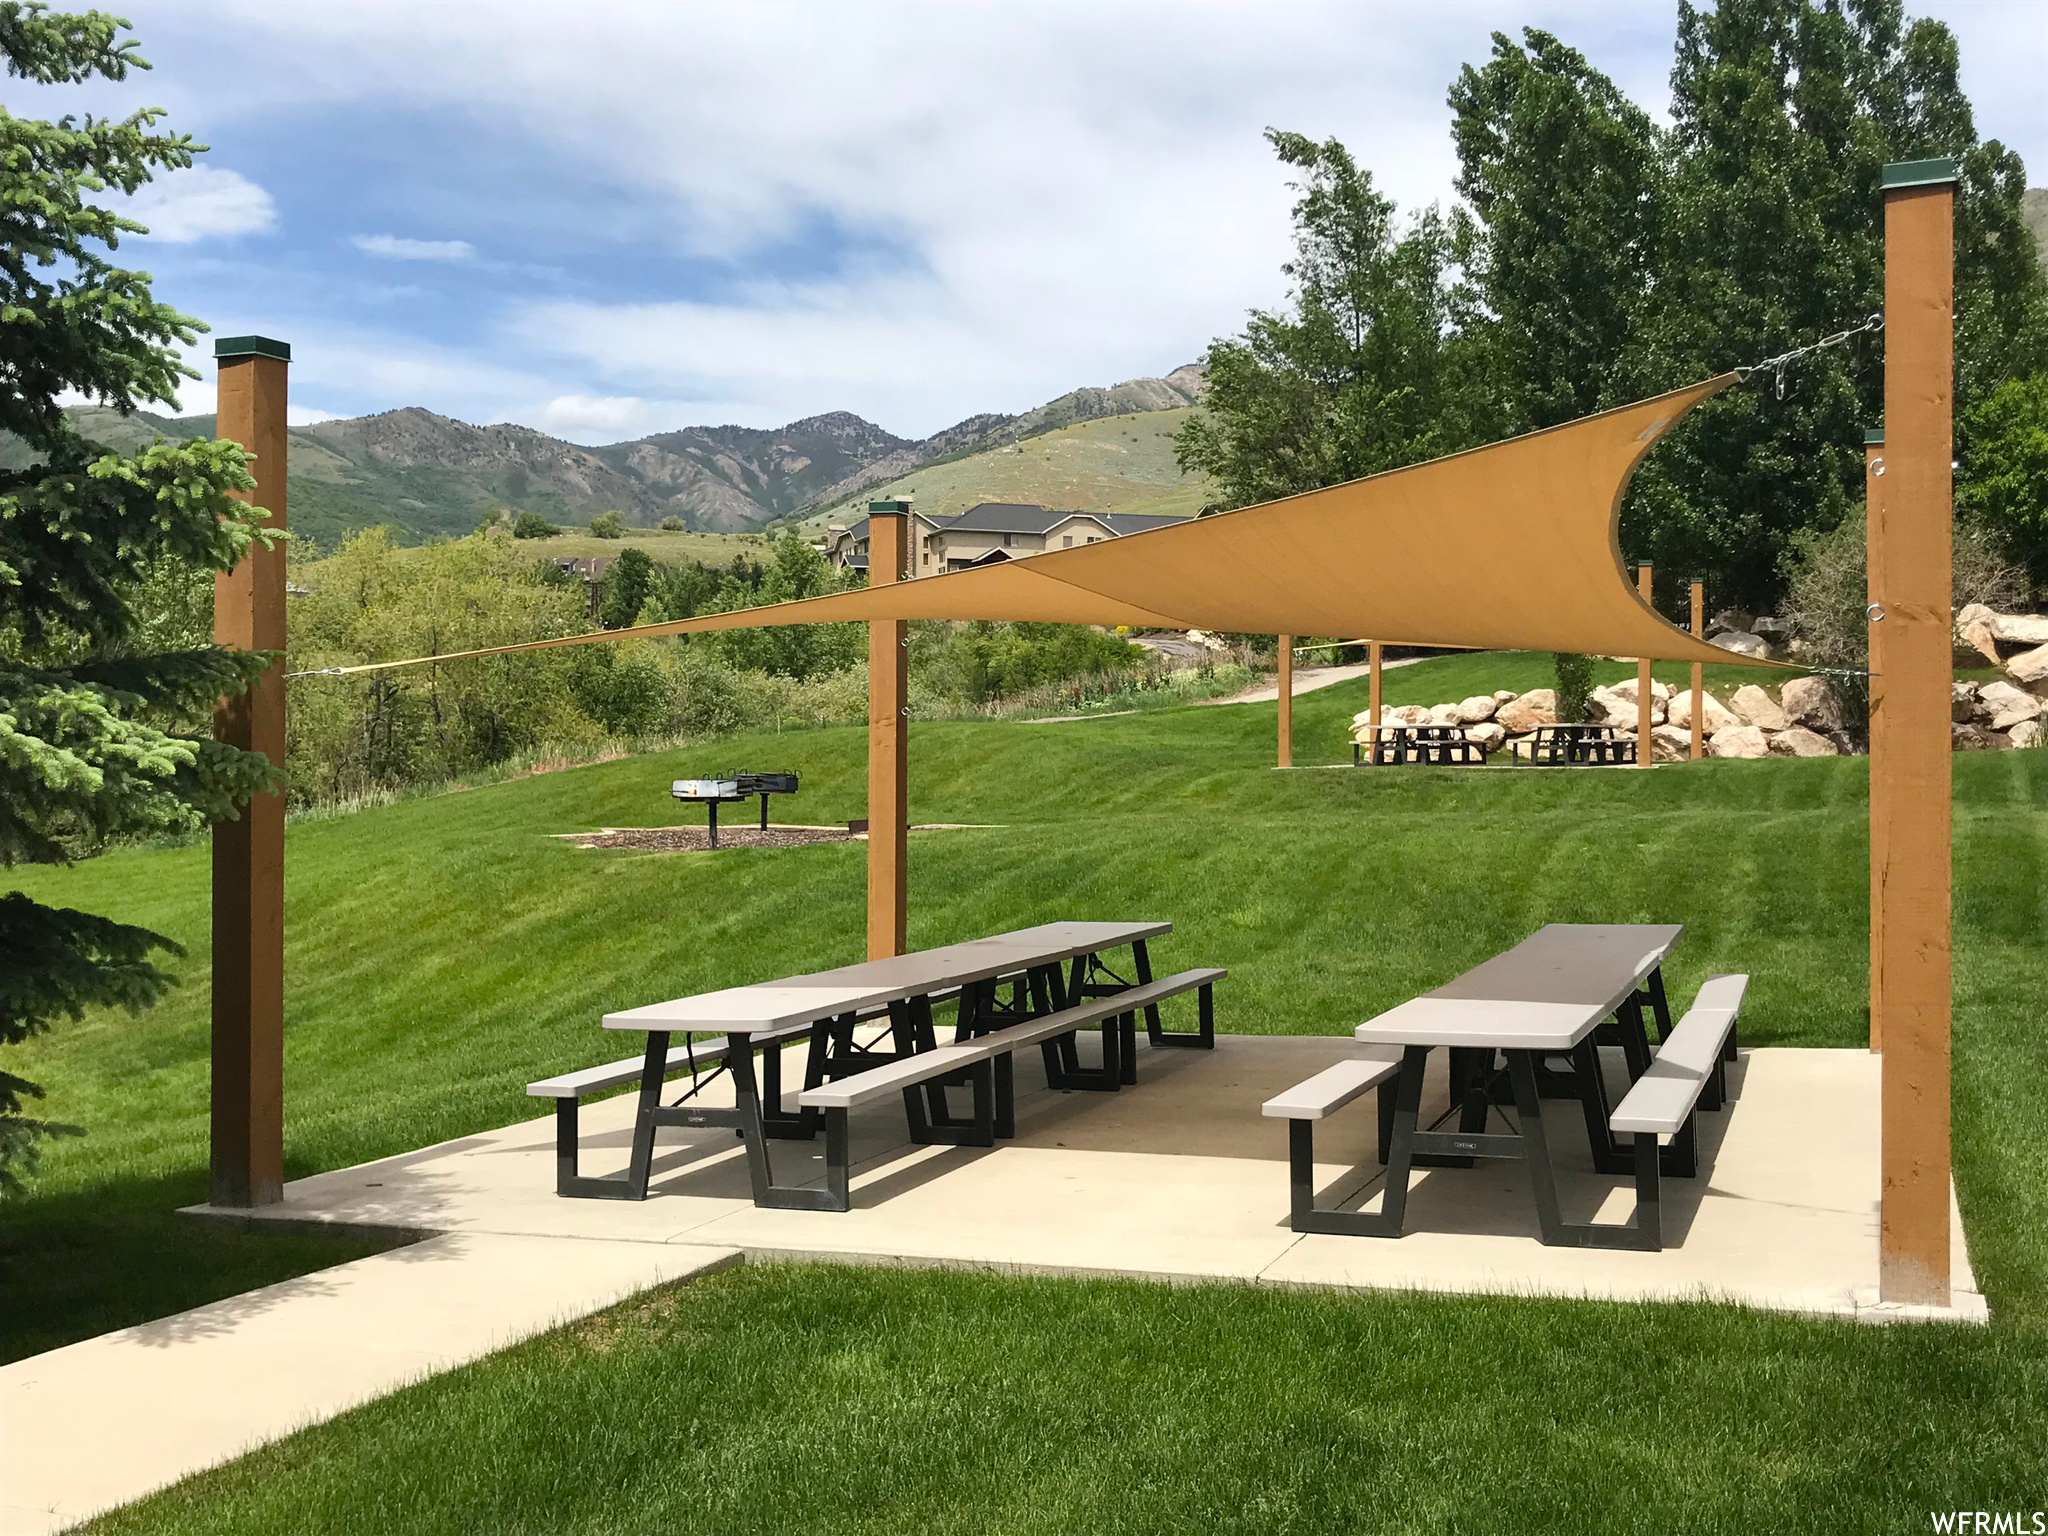 Community Other: Picnic Area